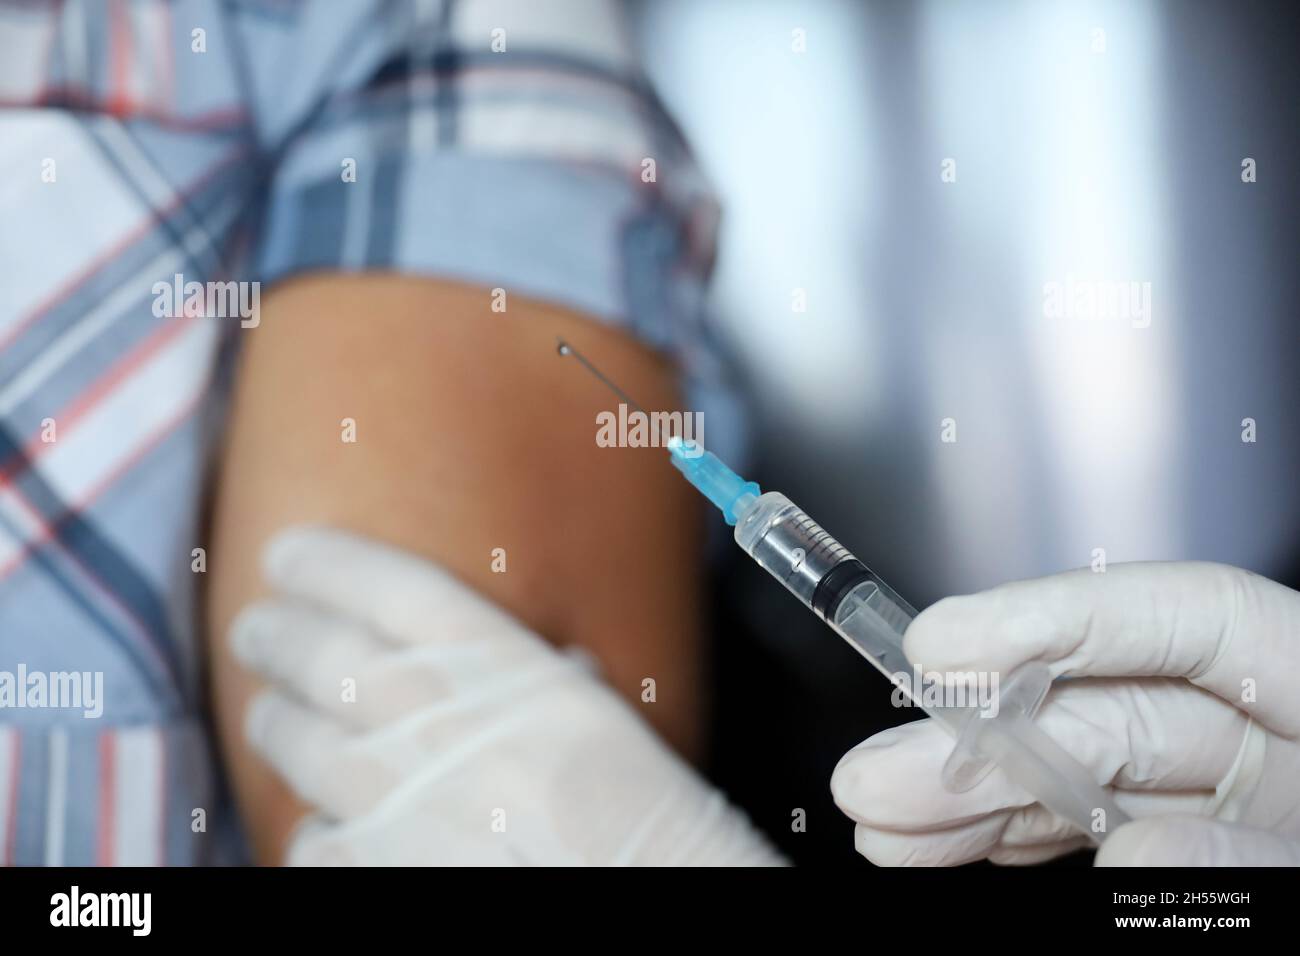 Vaccination during covid-19 pandemic, female hand in protective glove with syringe. Nurse preparing to injection into a male shoulder Stock Photo